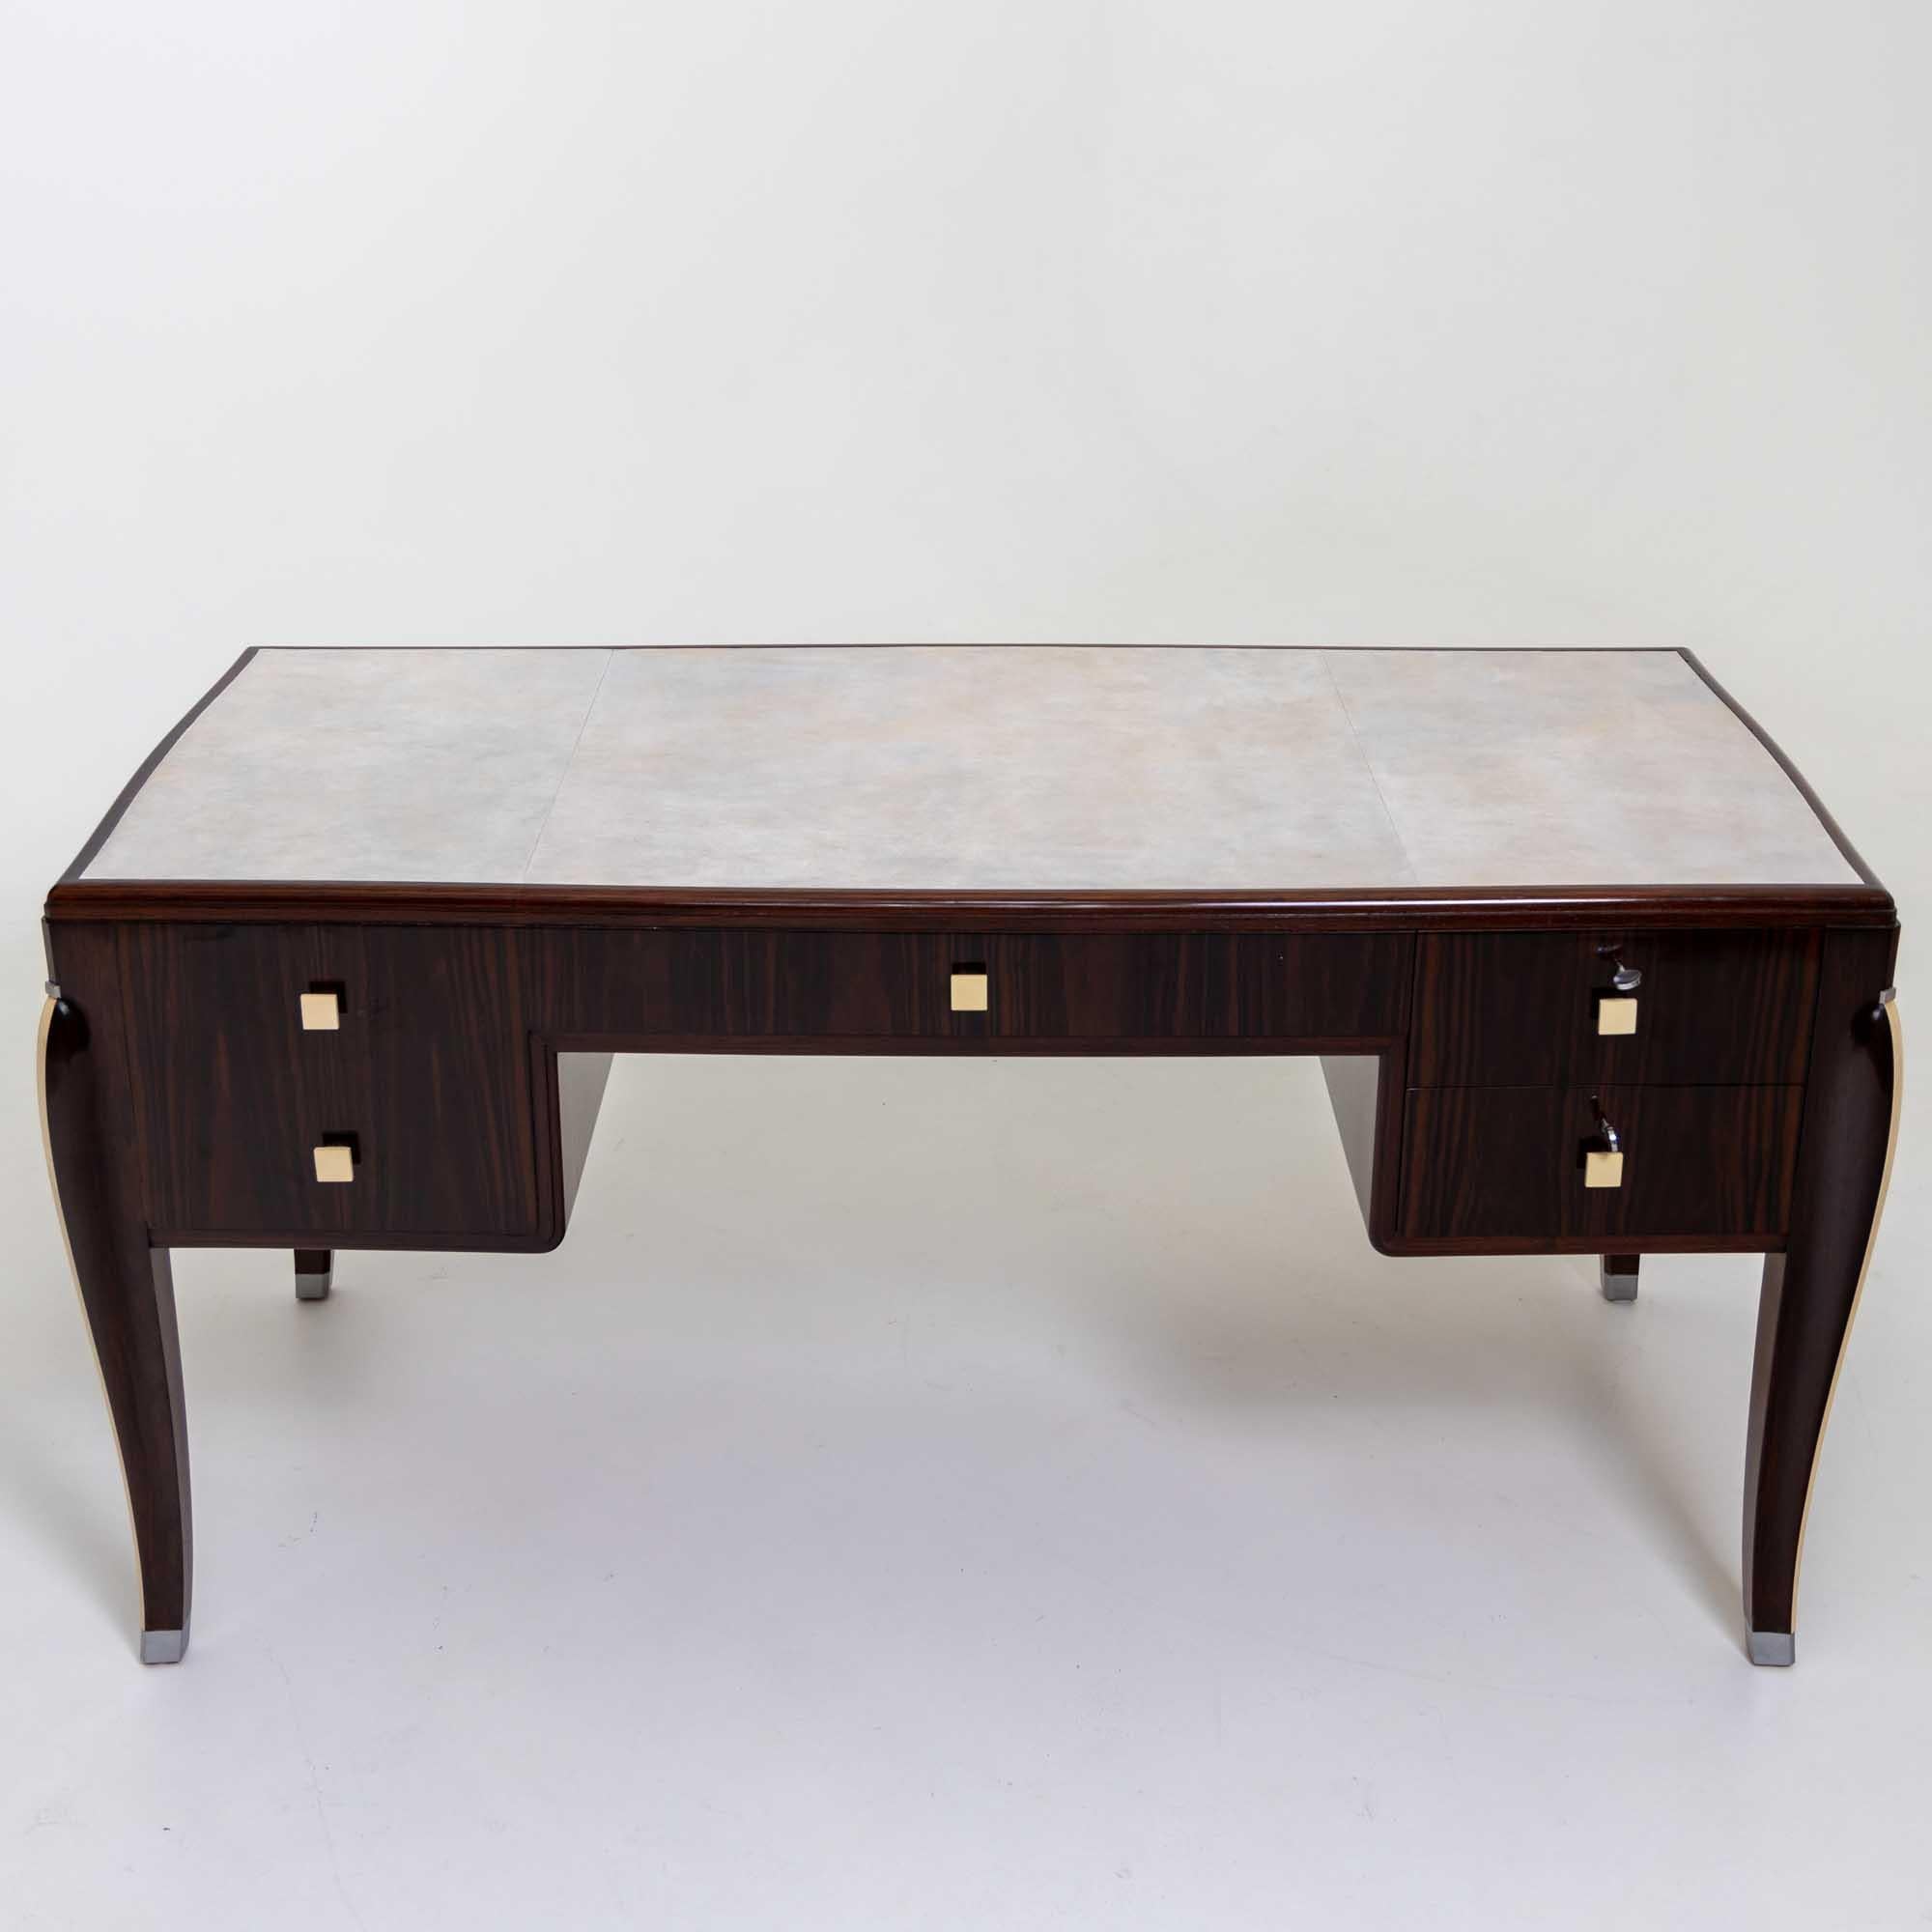 Art Deco Desk in the style of Jacques-Emile Ruhlmann (1879-1933), France, 1920s For Sale 8